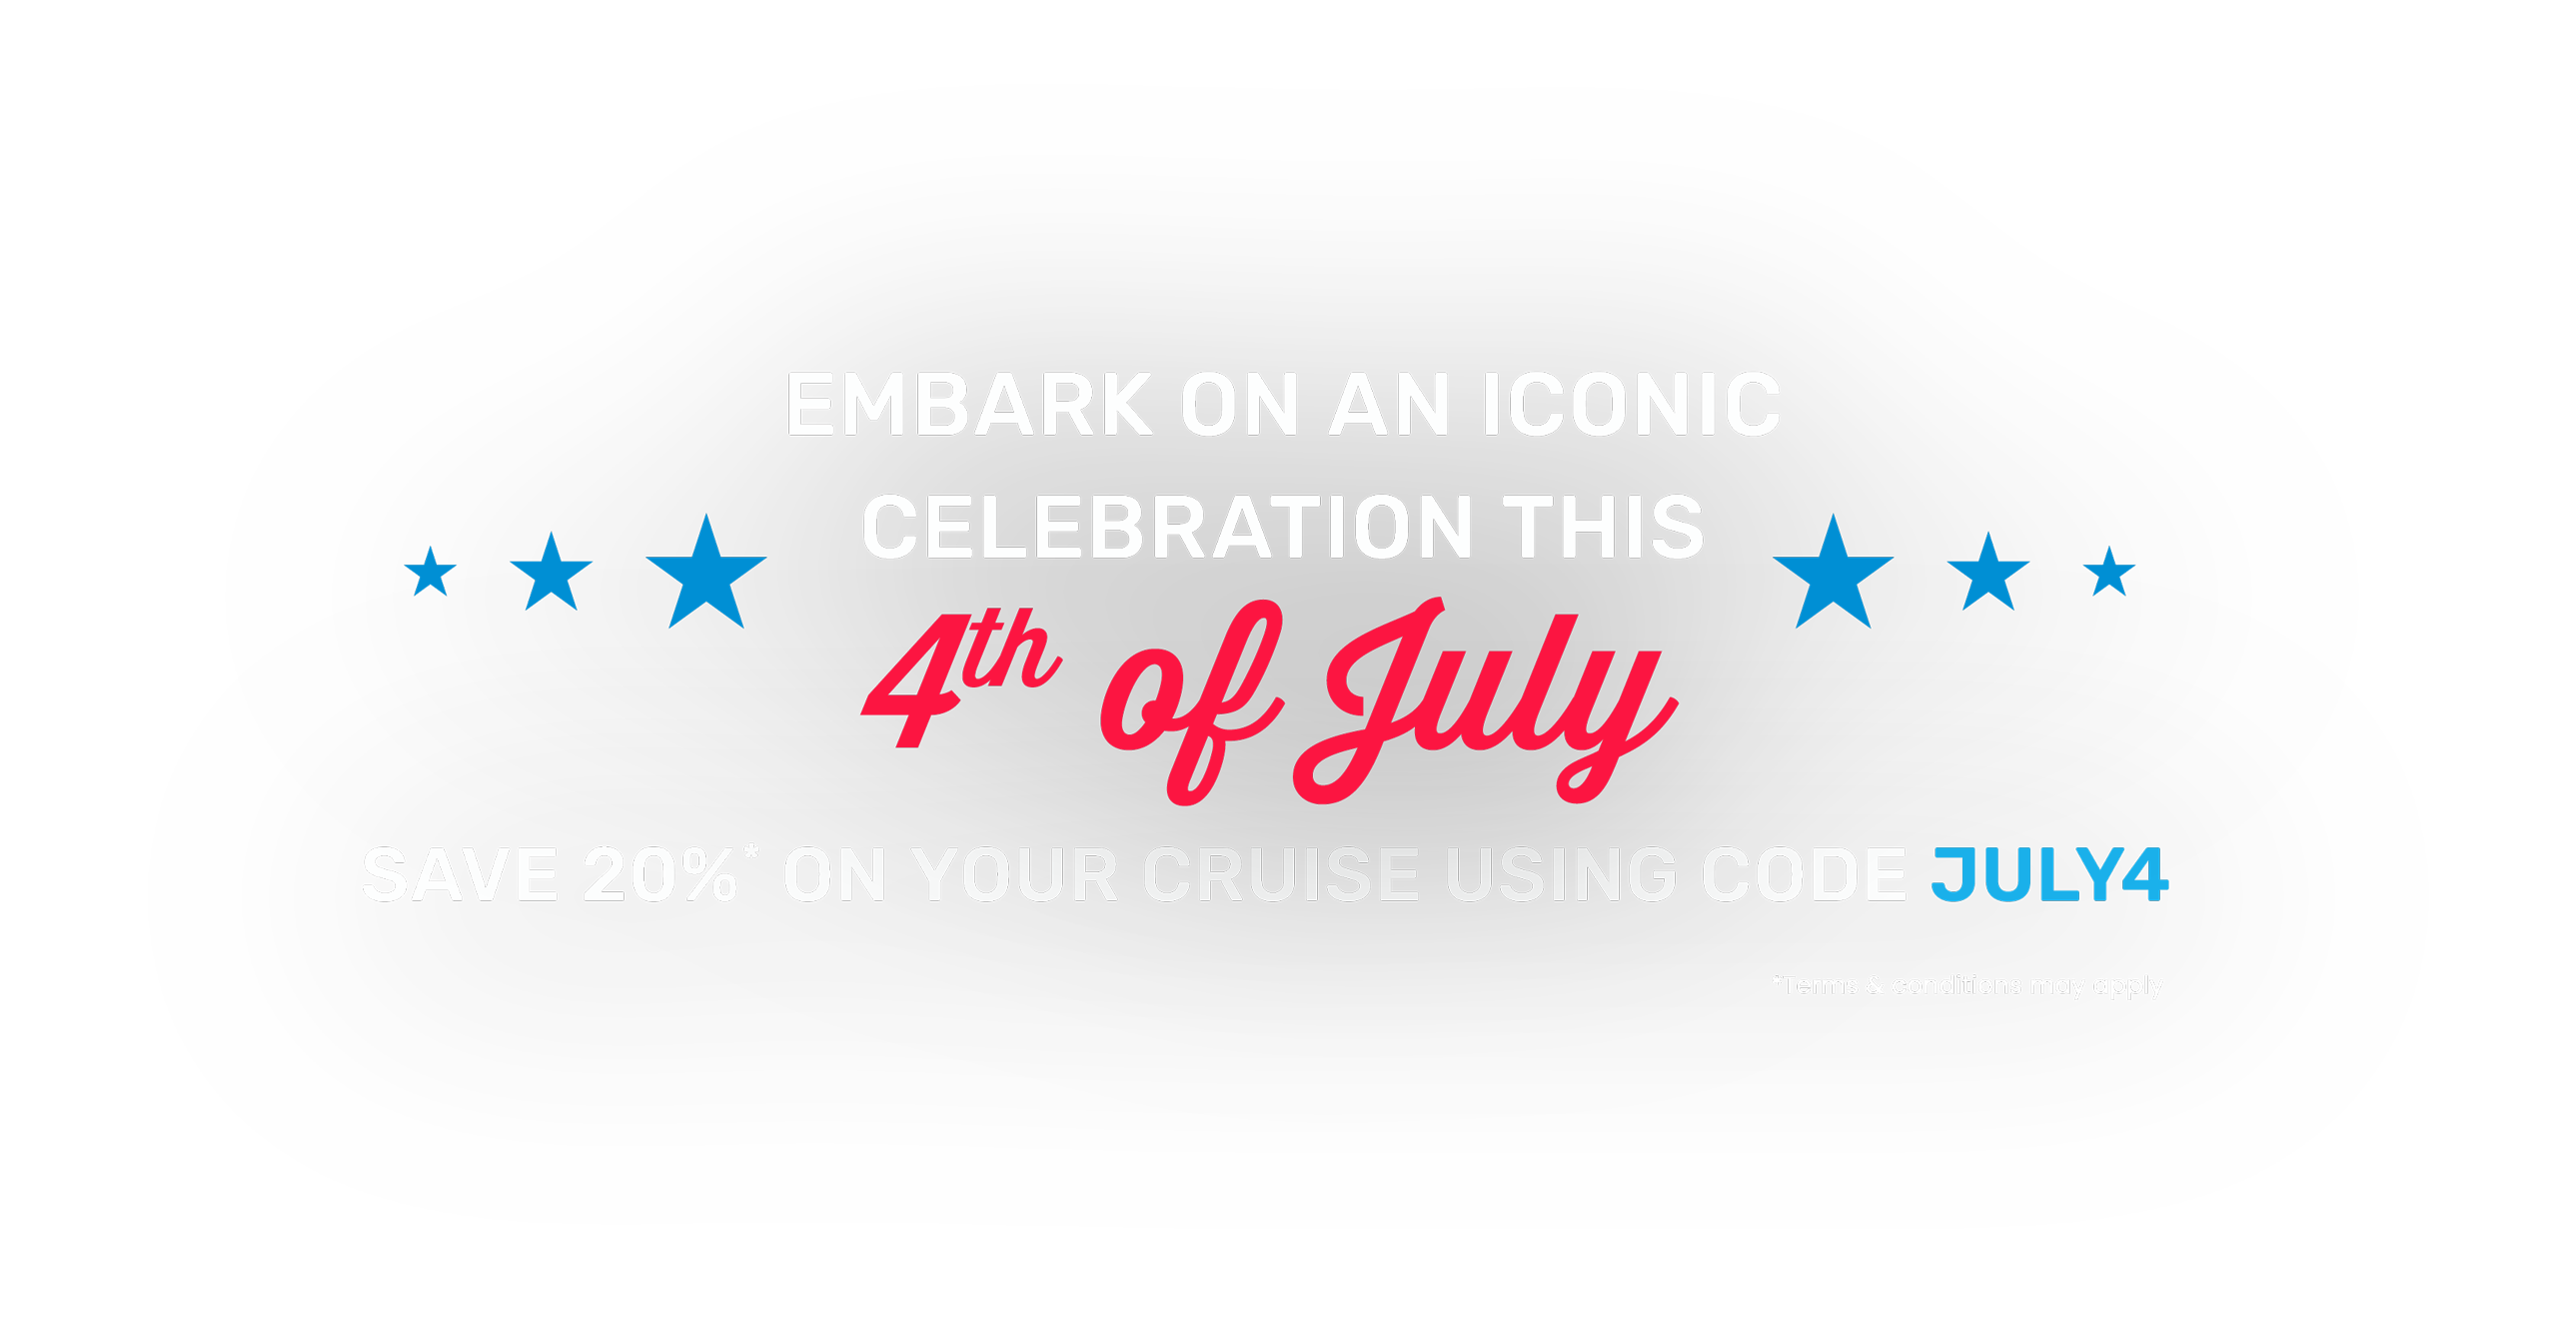 Embark on an Iconic Celebration This 4th of July. Save 20%* on Your Cruise Using Code July4